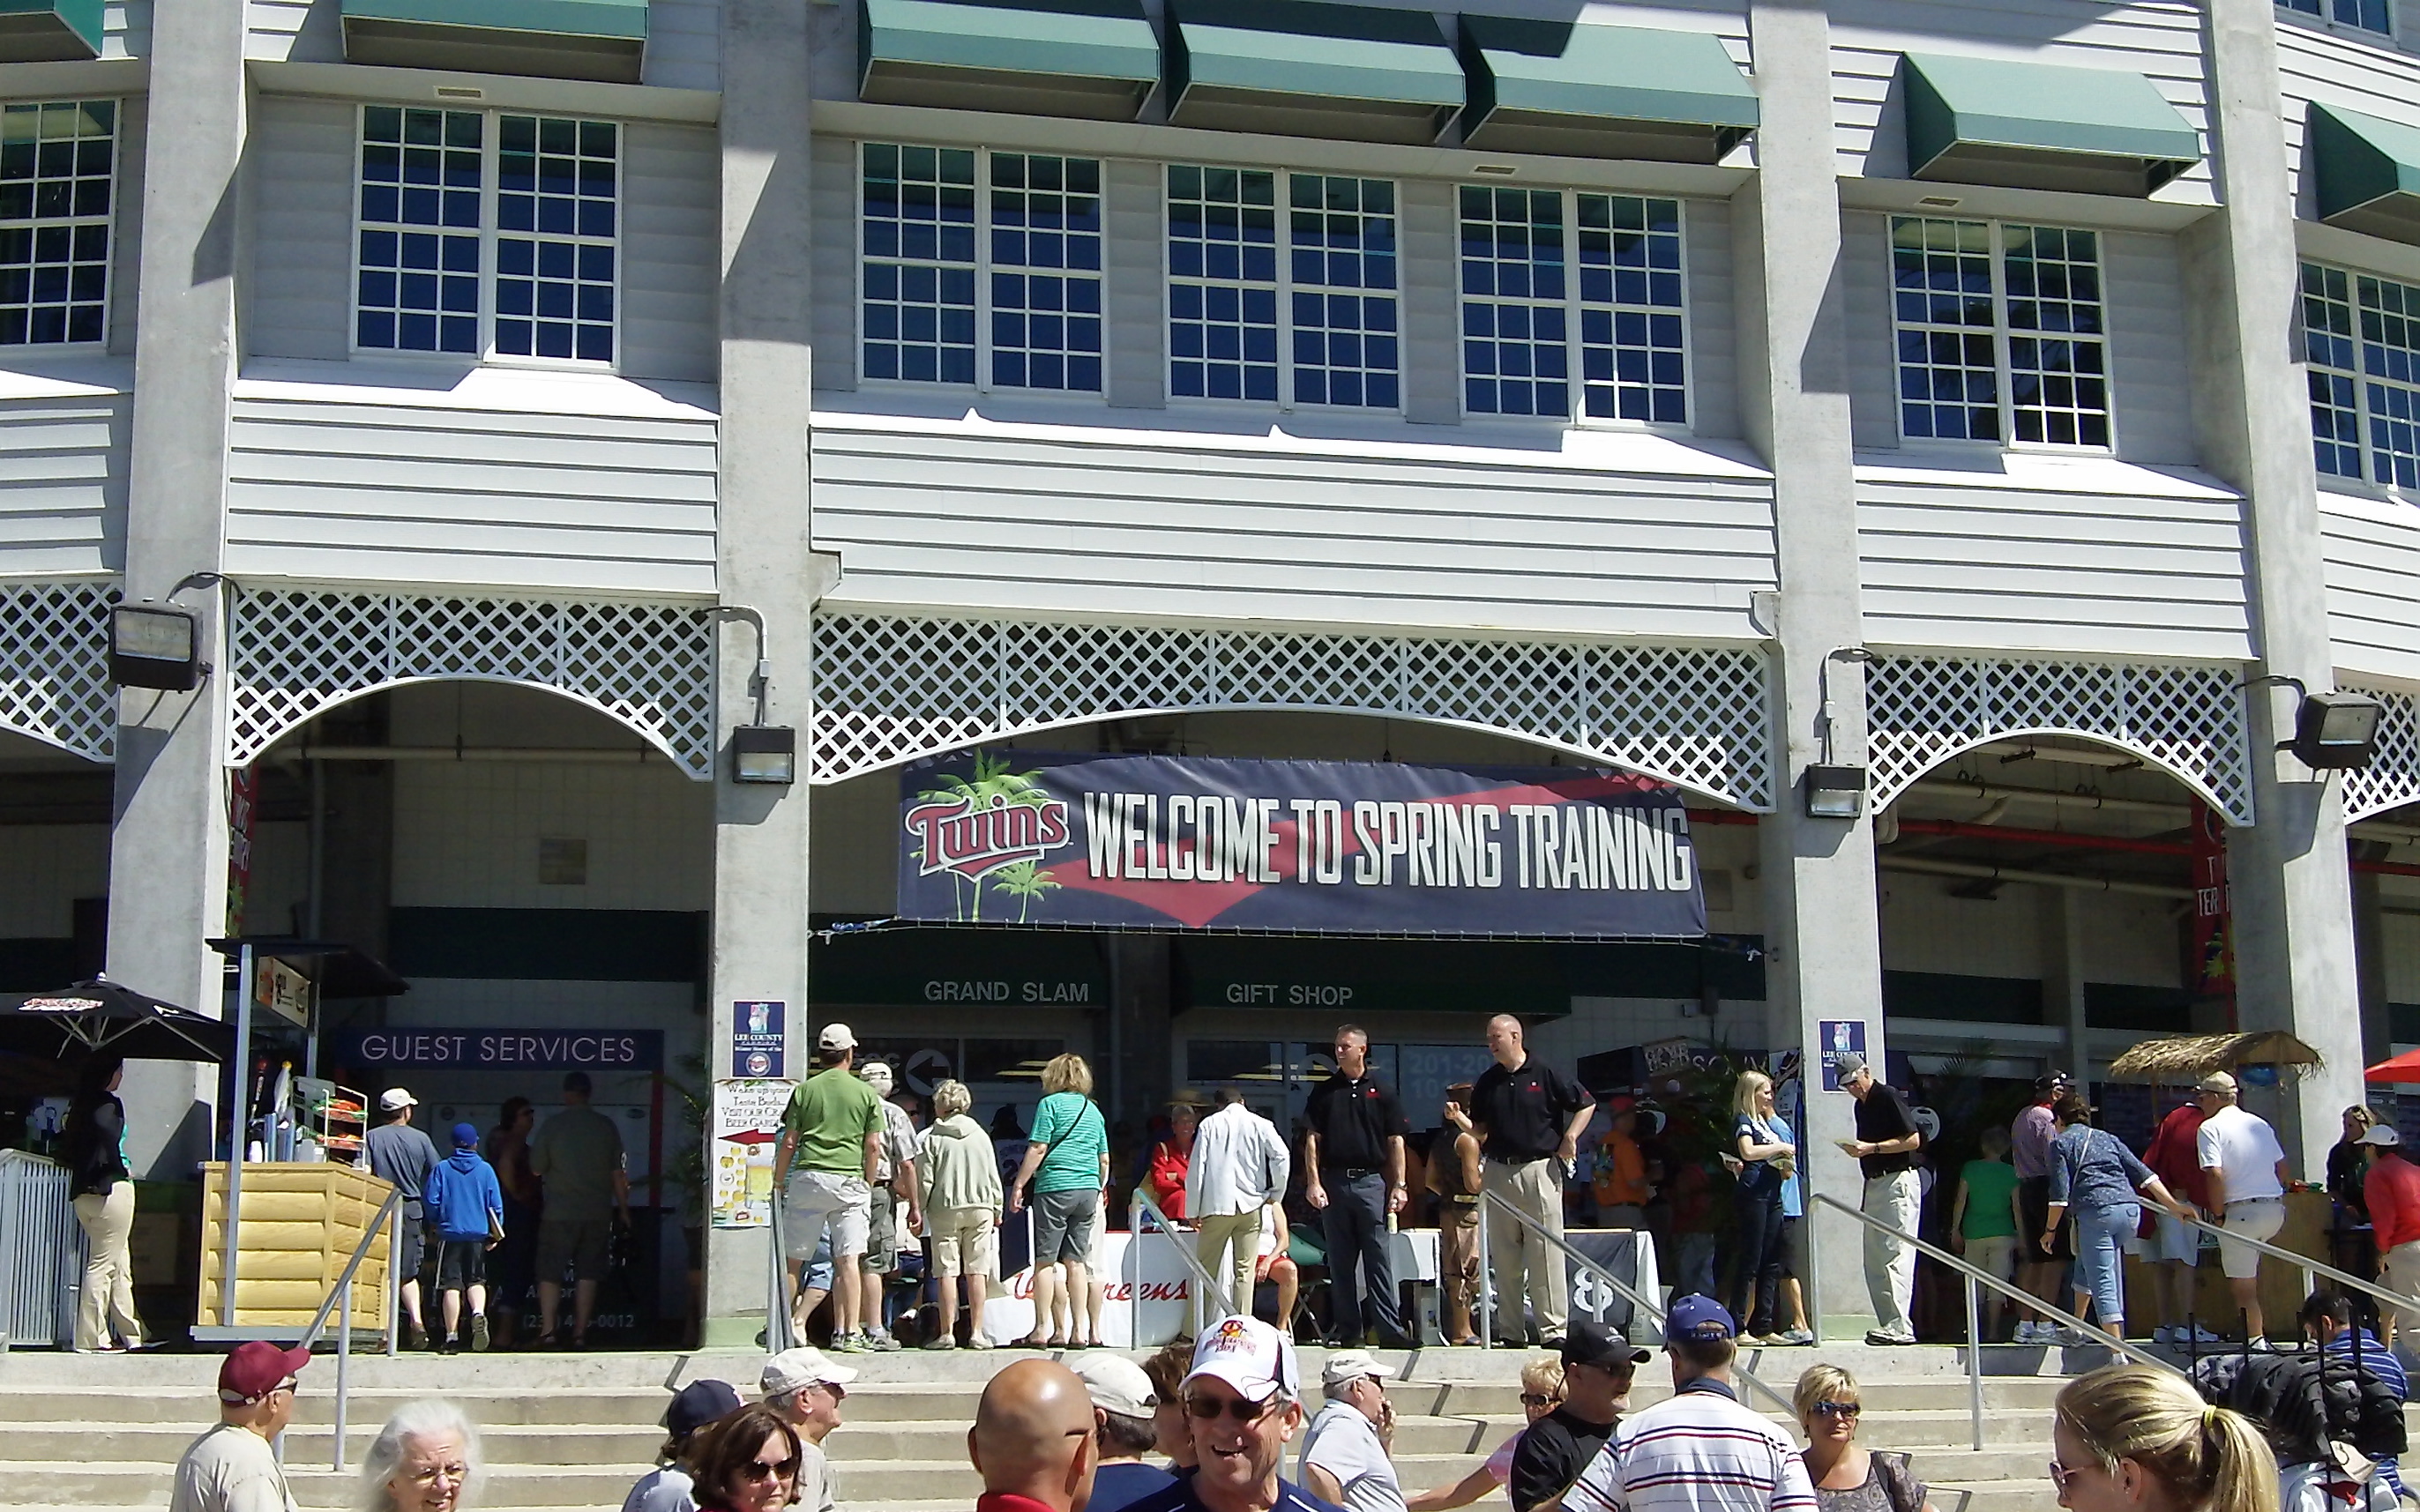 The Tampa Bay Rays faced off against the Minnesota Twins at Hammond Stadium on March 5, 2013